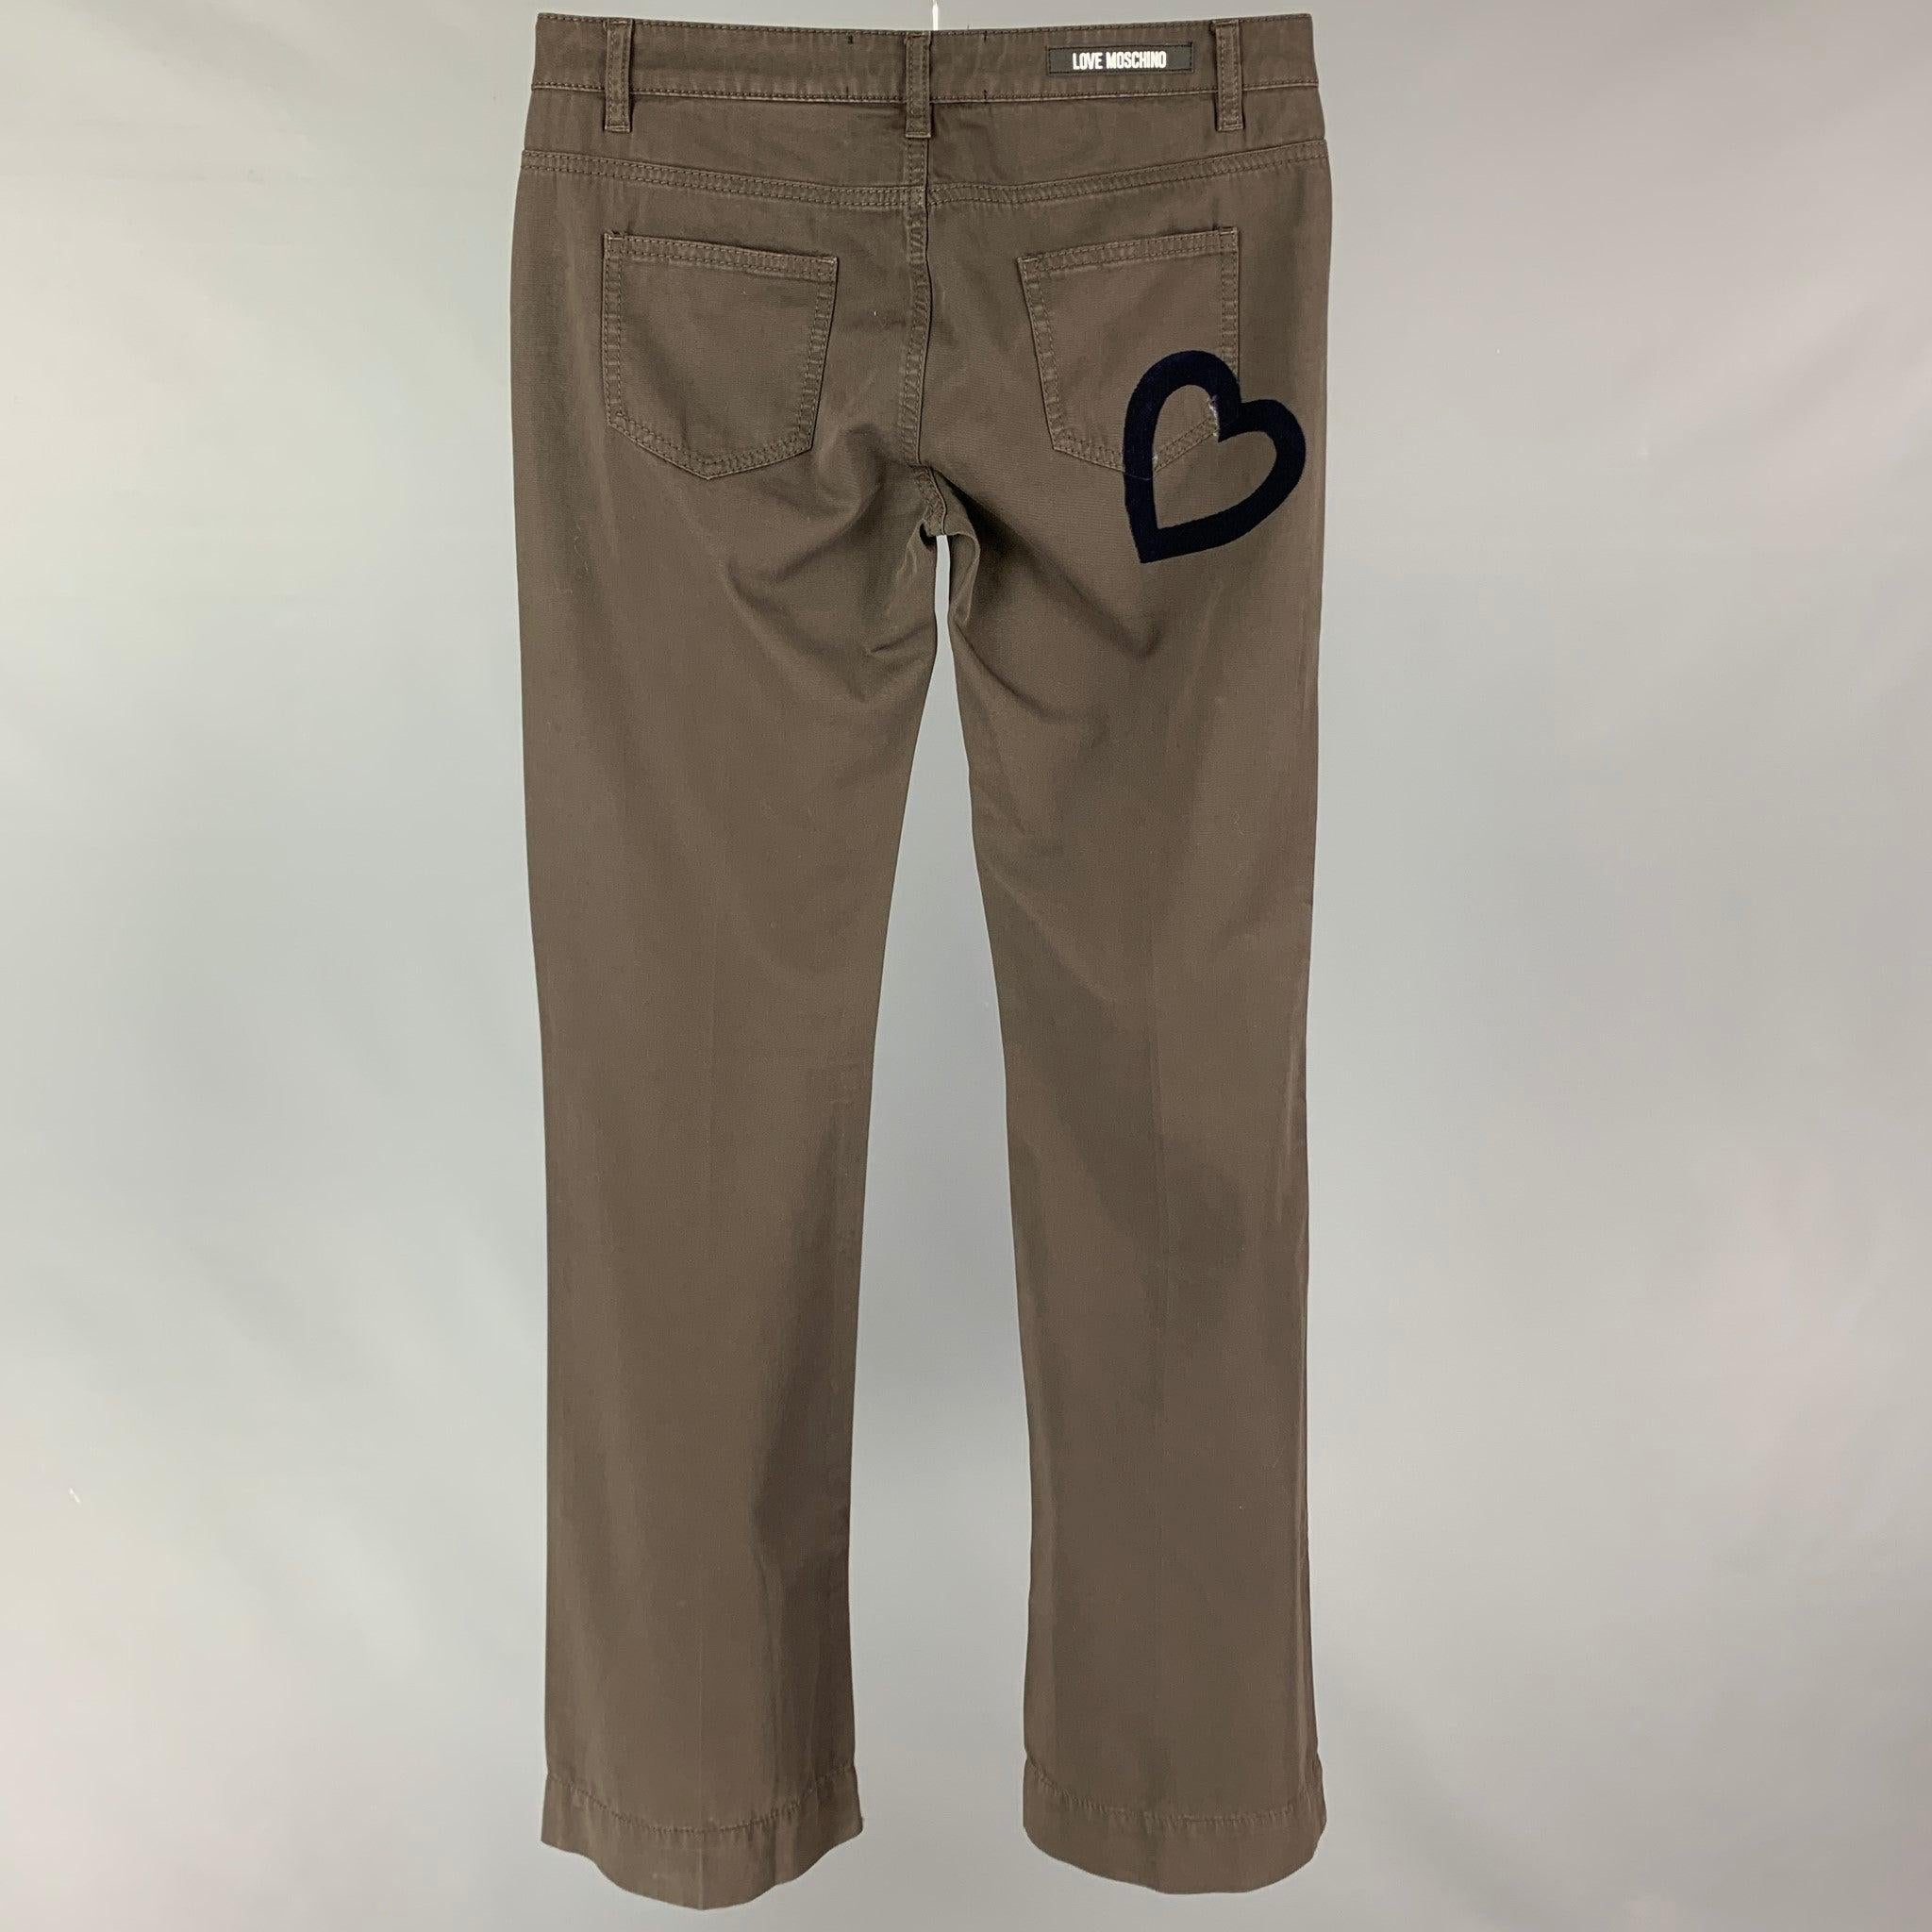 LOVE MOSCHINO casual pants comes in a brown cotton featuring a wide leg, back velvet heart detail, and a button fly closure. Includes tags. Made in Italy.
Very Good
Pre-Owned Condition. 

Marked:   26 

Measurements: 
  Waist: 30 inches  Rise: 8